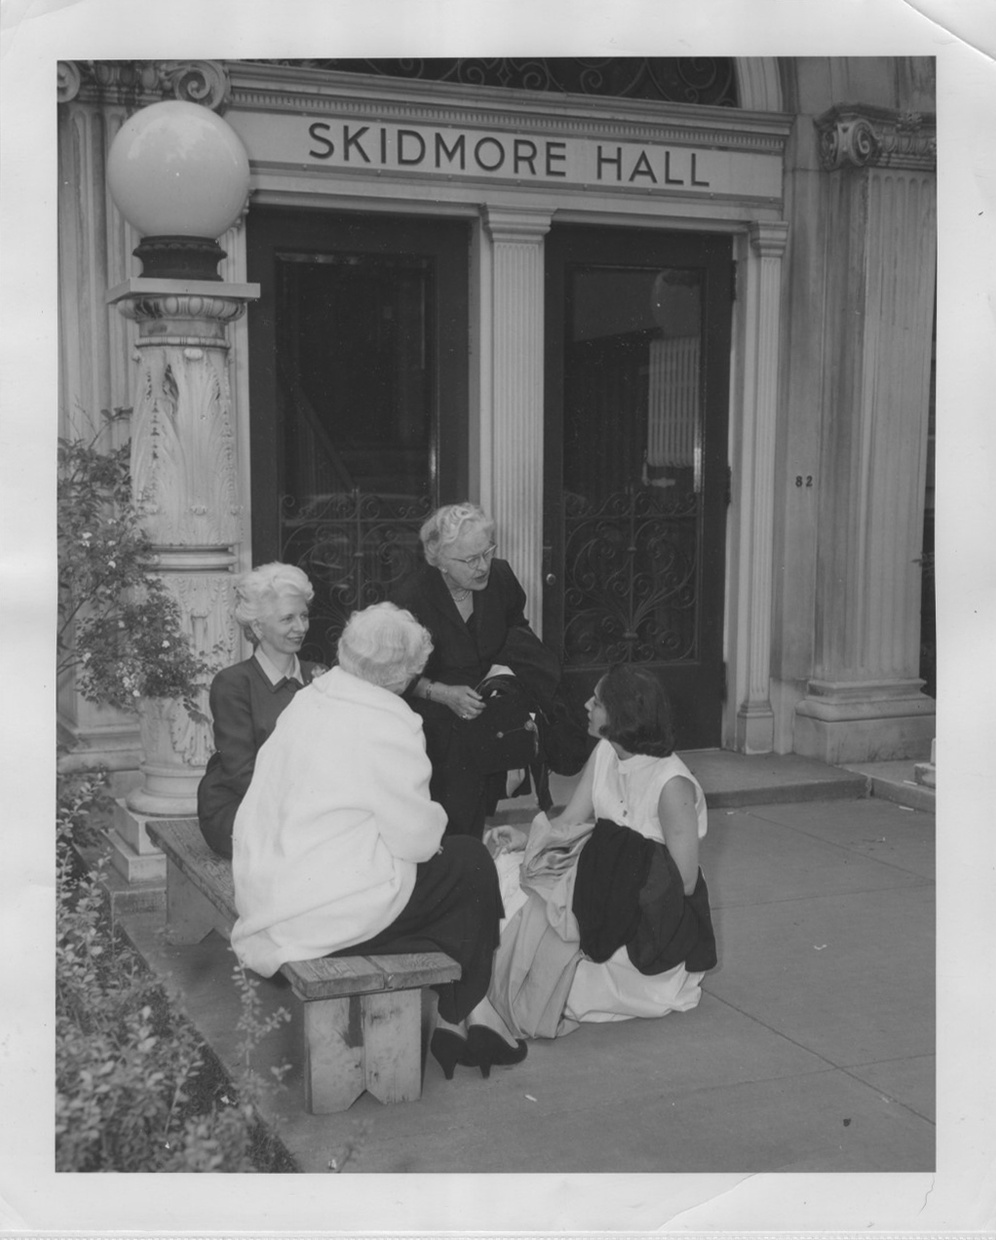 A black and white photograph depicts four light-skinned women in conversation, three of whom are older with white hair and one younger with dark hair, in front of a building with two large doors that says “Skidmore Hall”.